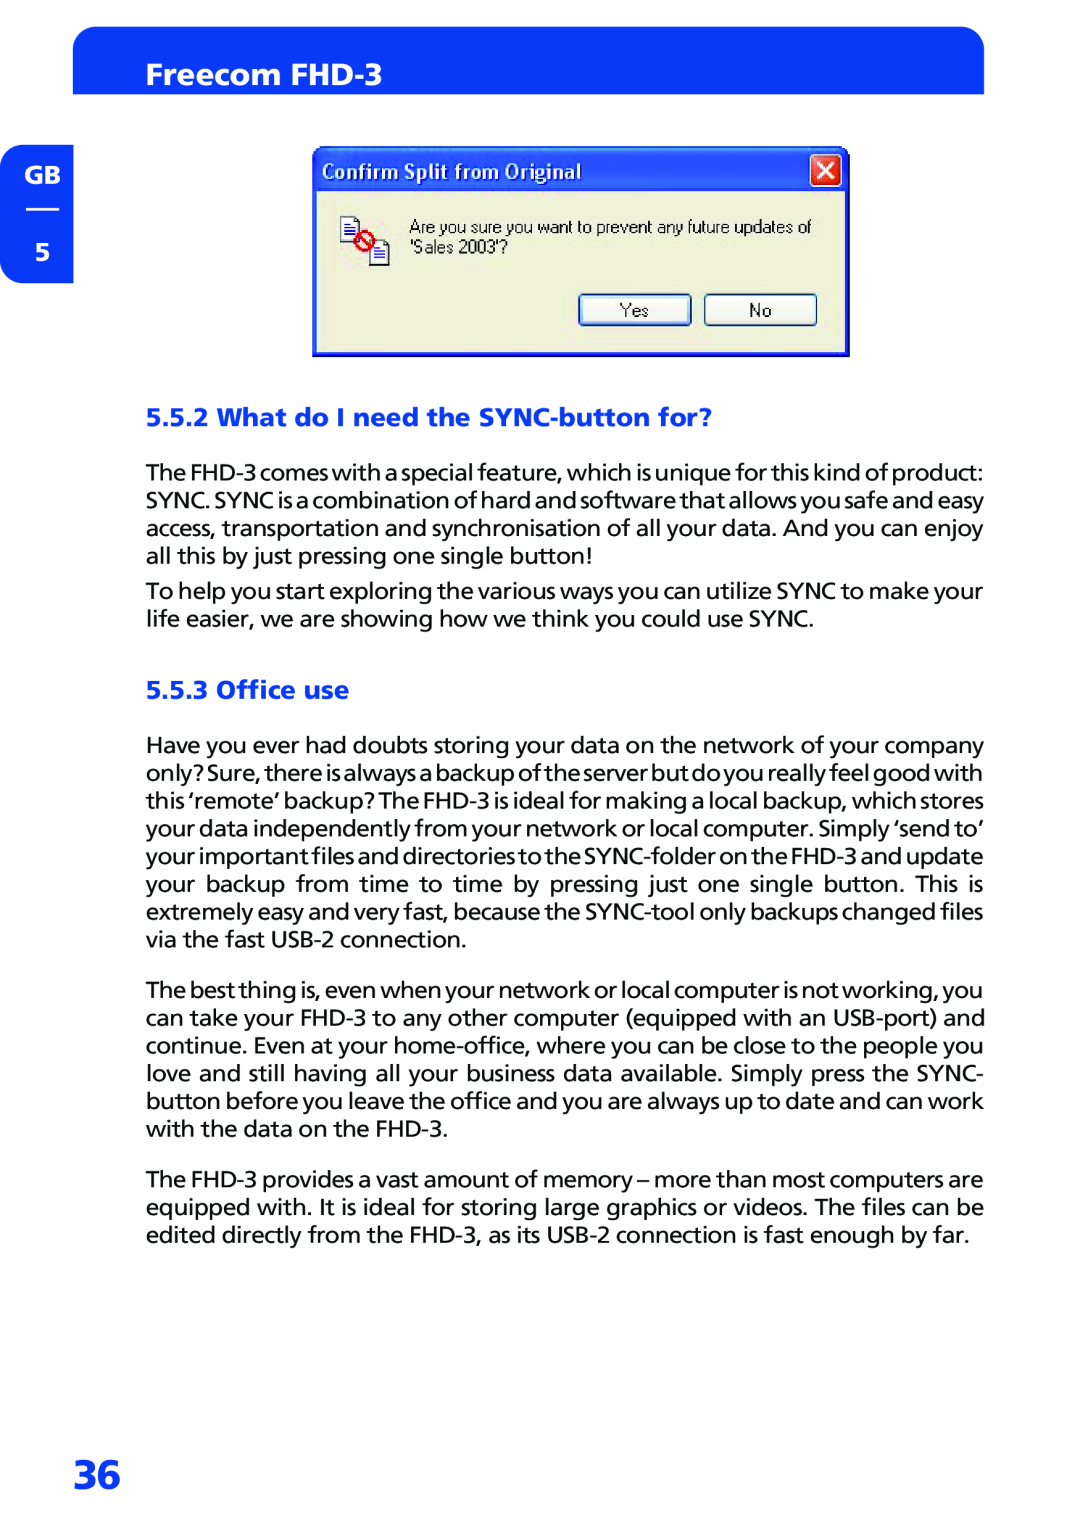 Freecom Technologies manual What do I need the SYNC-button for?, Office use, Freecom FHD-3 